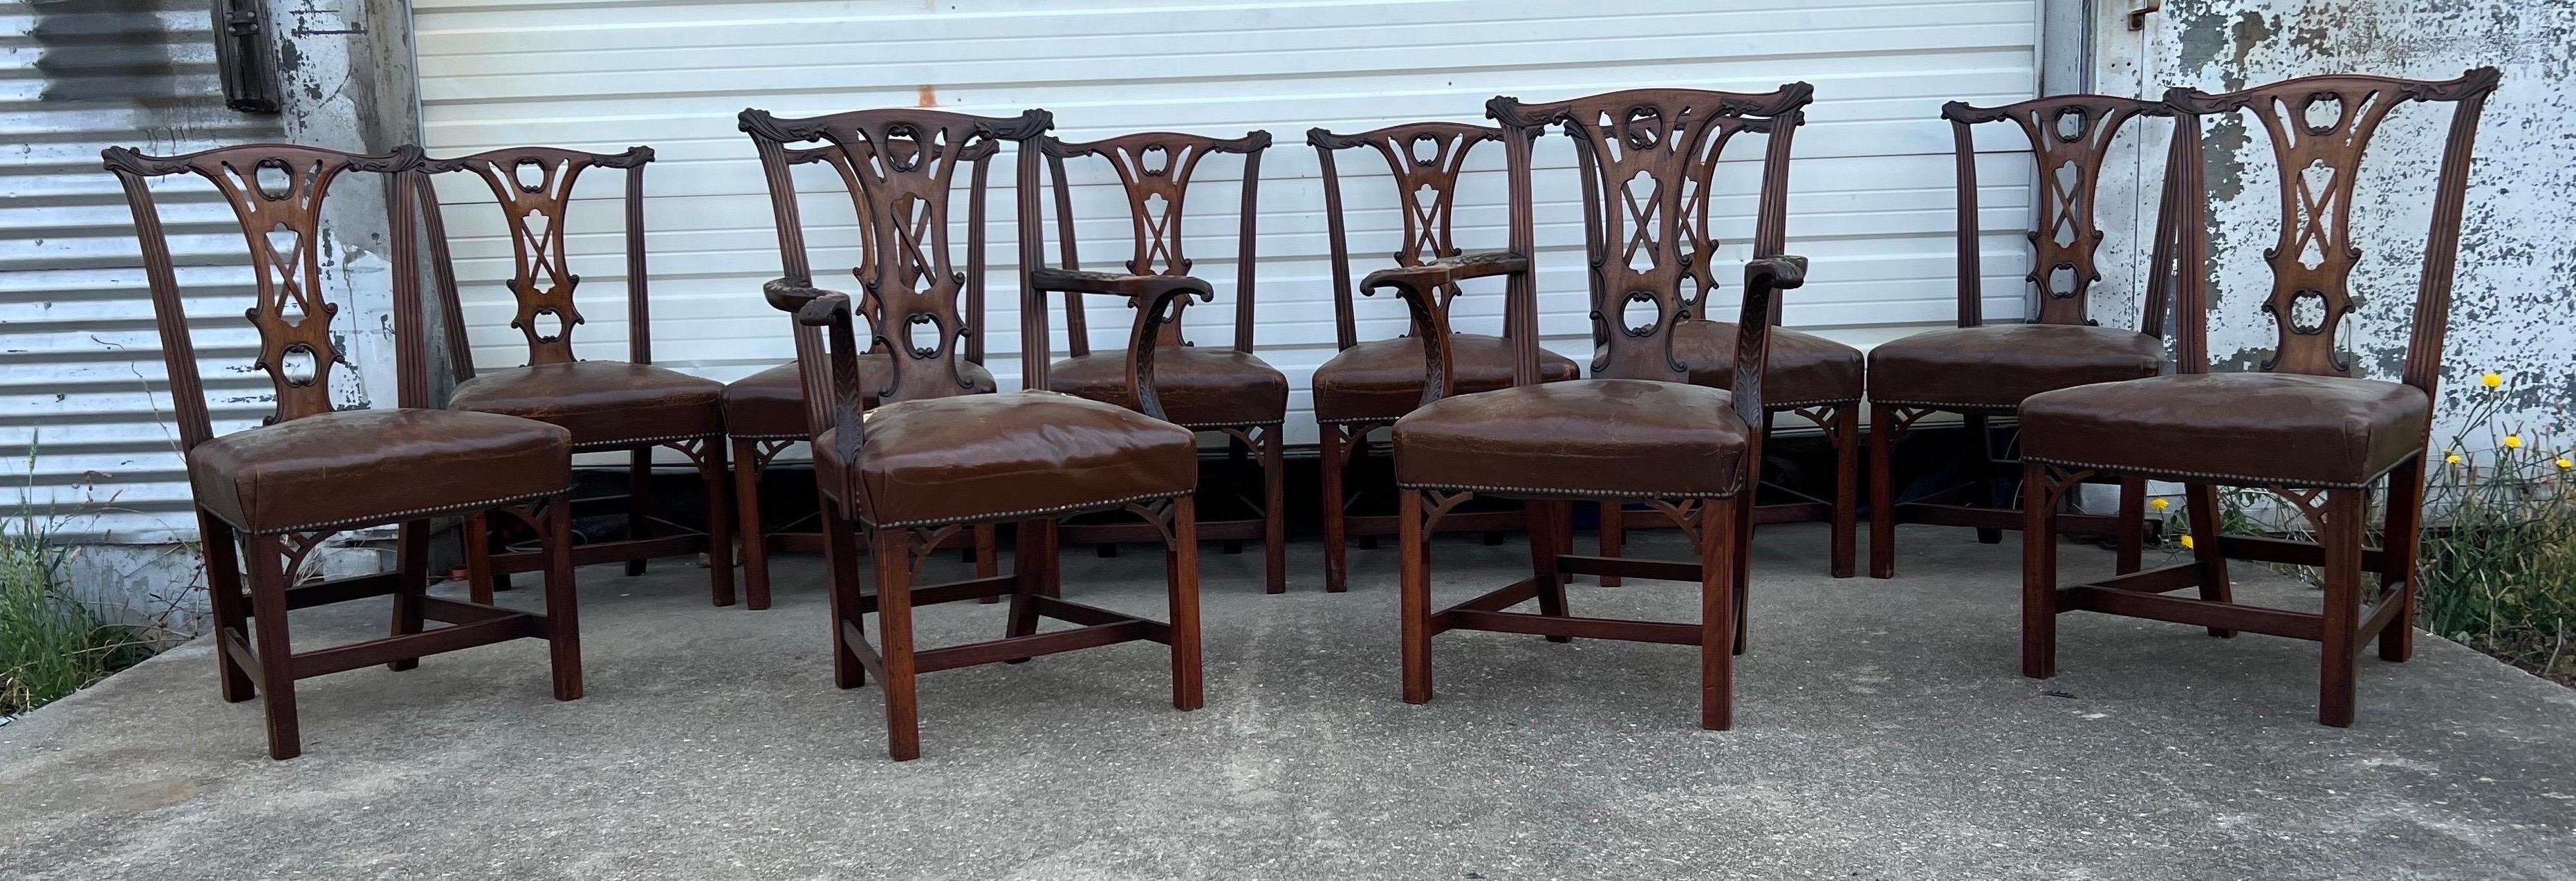 Very fine set of 10 18th century Irish chippendale dining chairs. Made in the period of heavy 1st growth mahogany, these chairs feature very well executed carving and through tenon stretchers. 

8 side chairs and 2 arm chairs 
Side chair